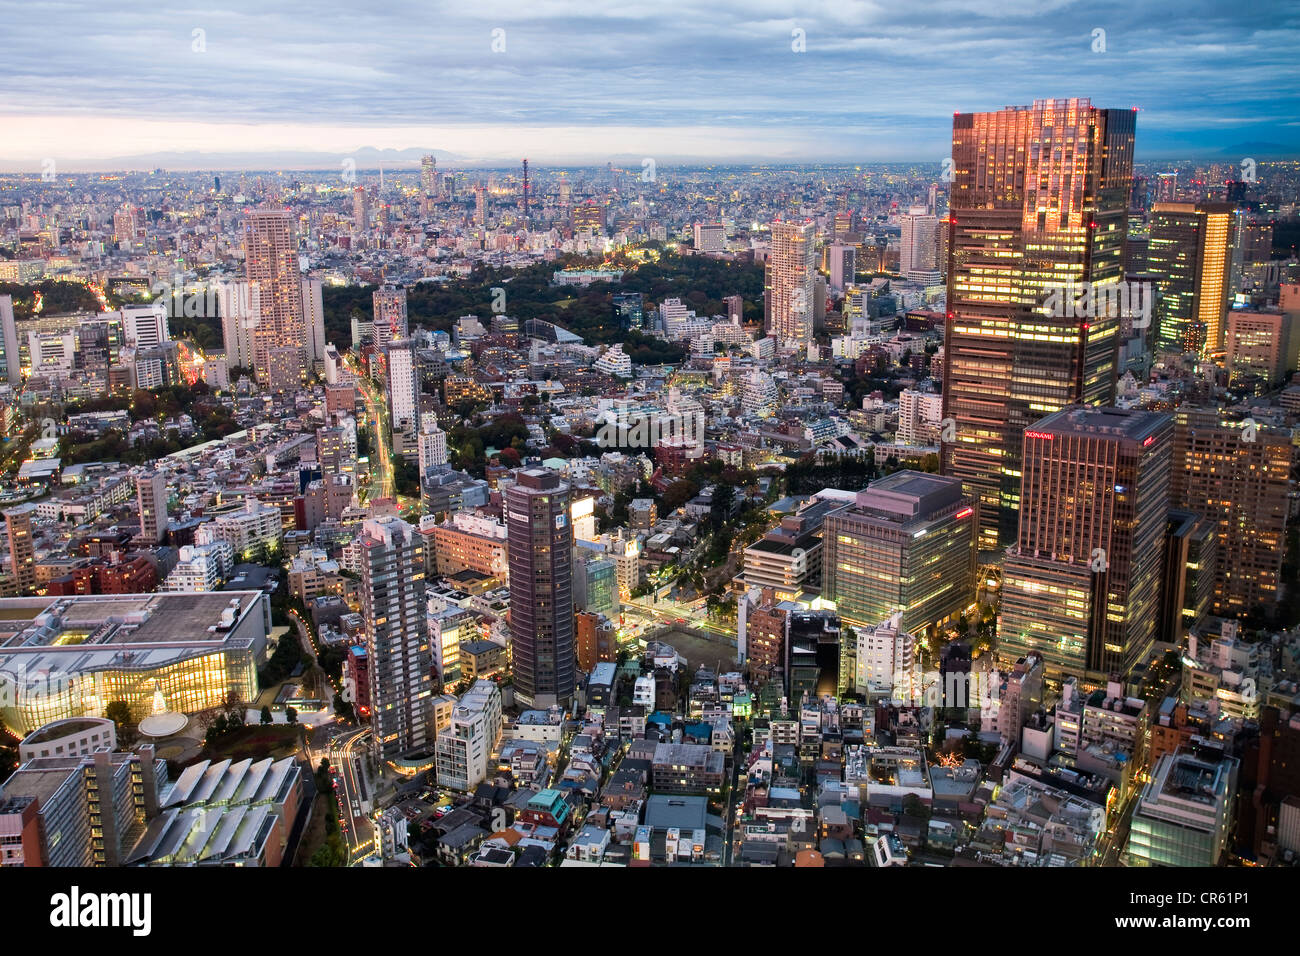 Japan, Honshu Island, Tokyo, Roppongi Hills, view from the Tokyo City View on the city center Stock Photo